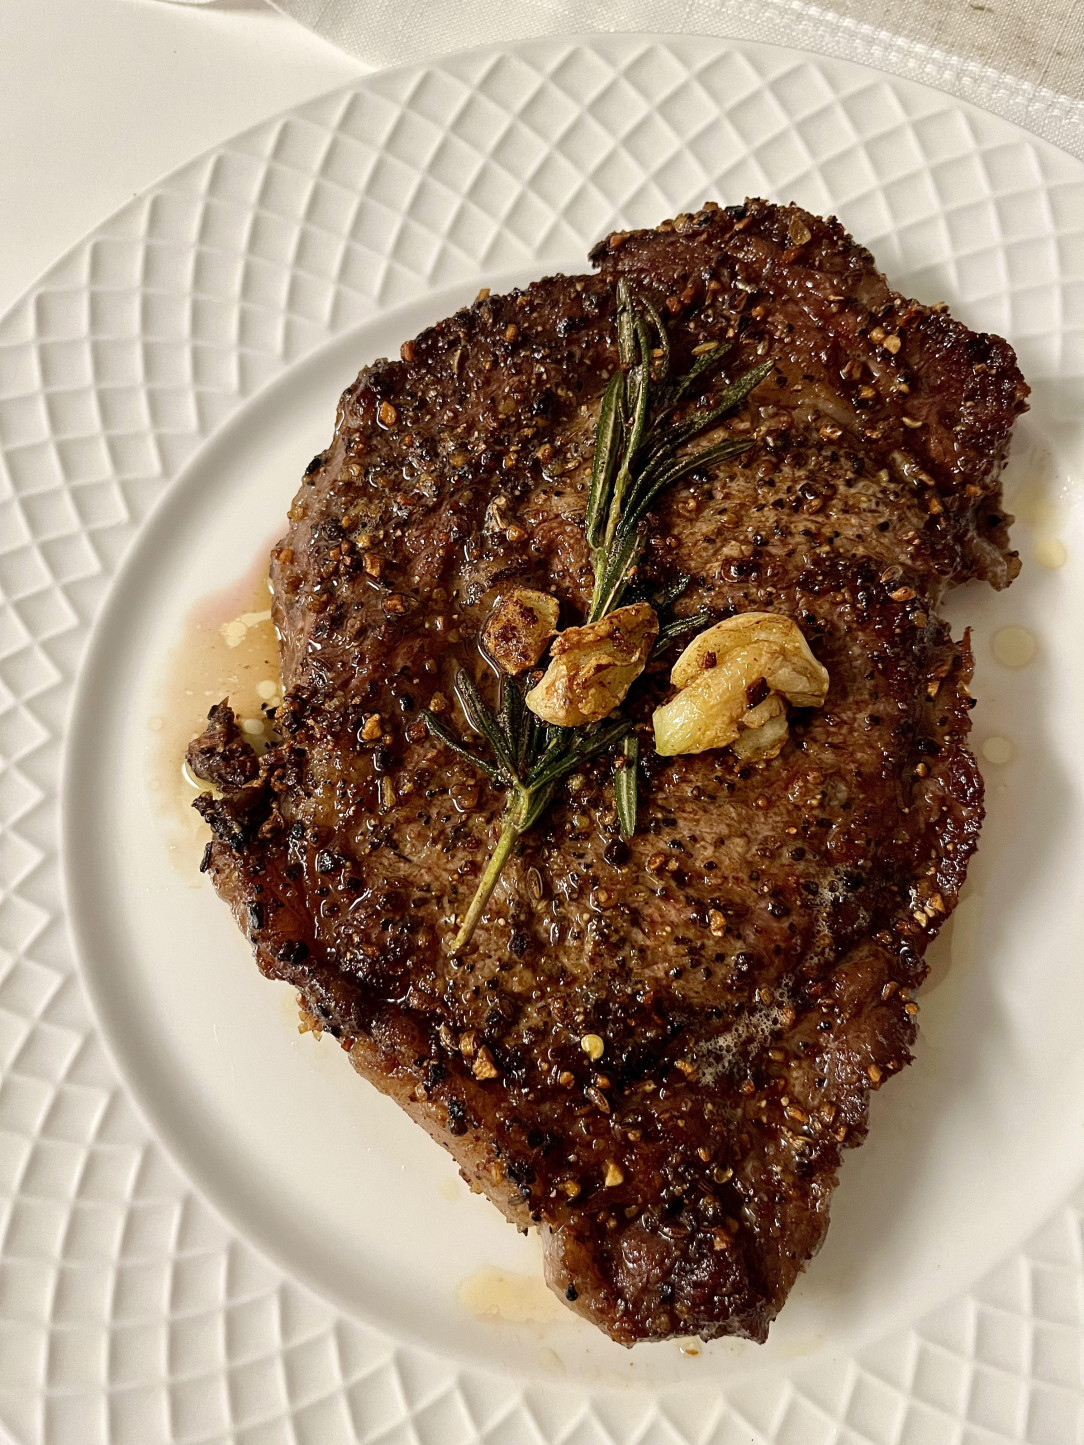 Seared ribeye basted with butter, rosemary and garlic